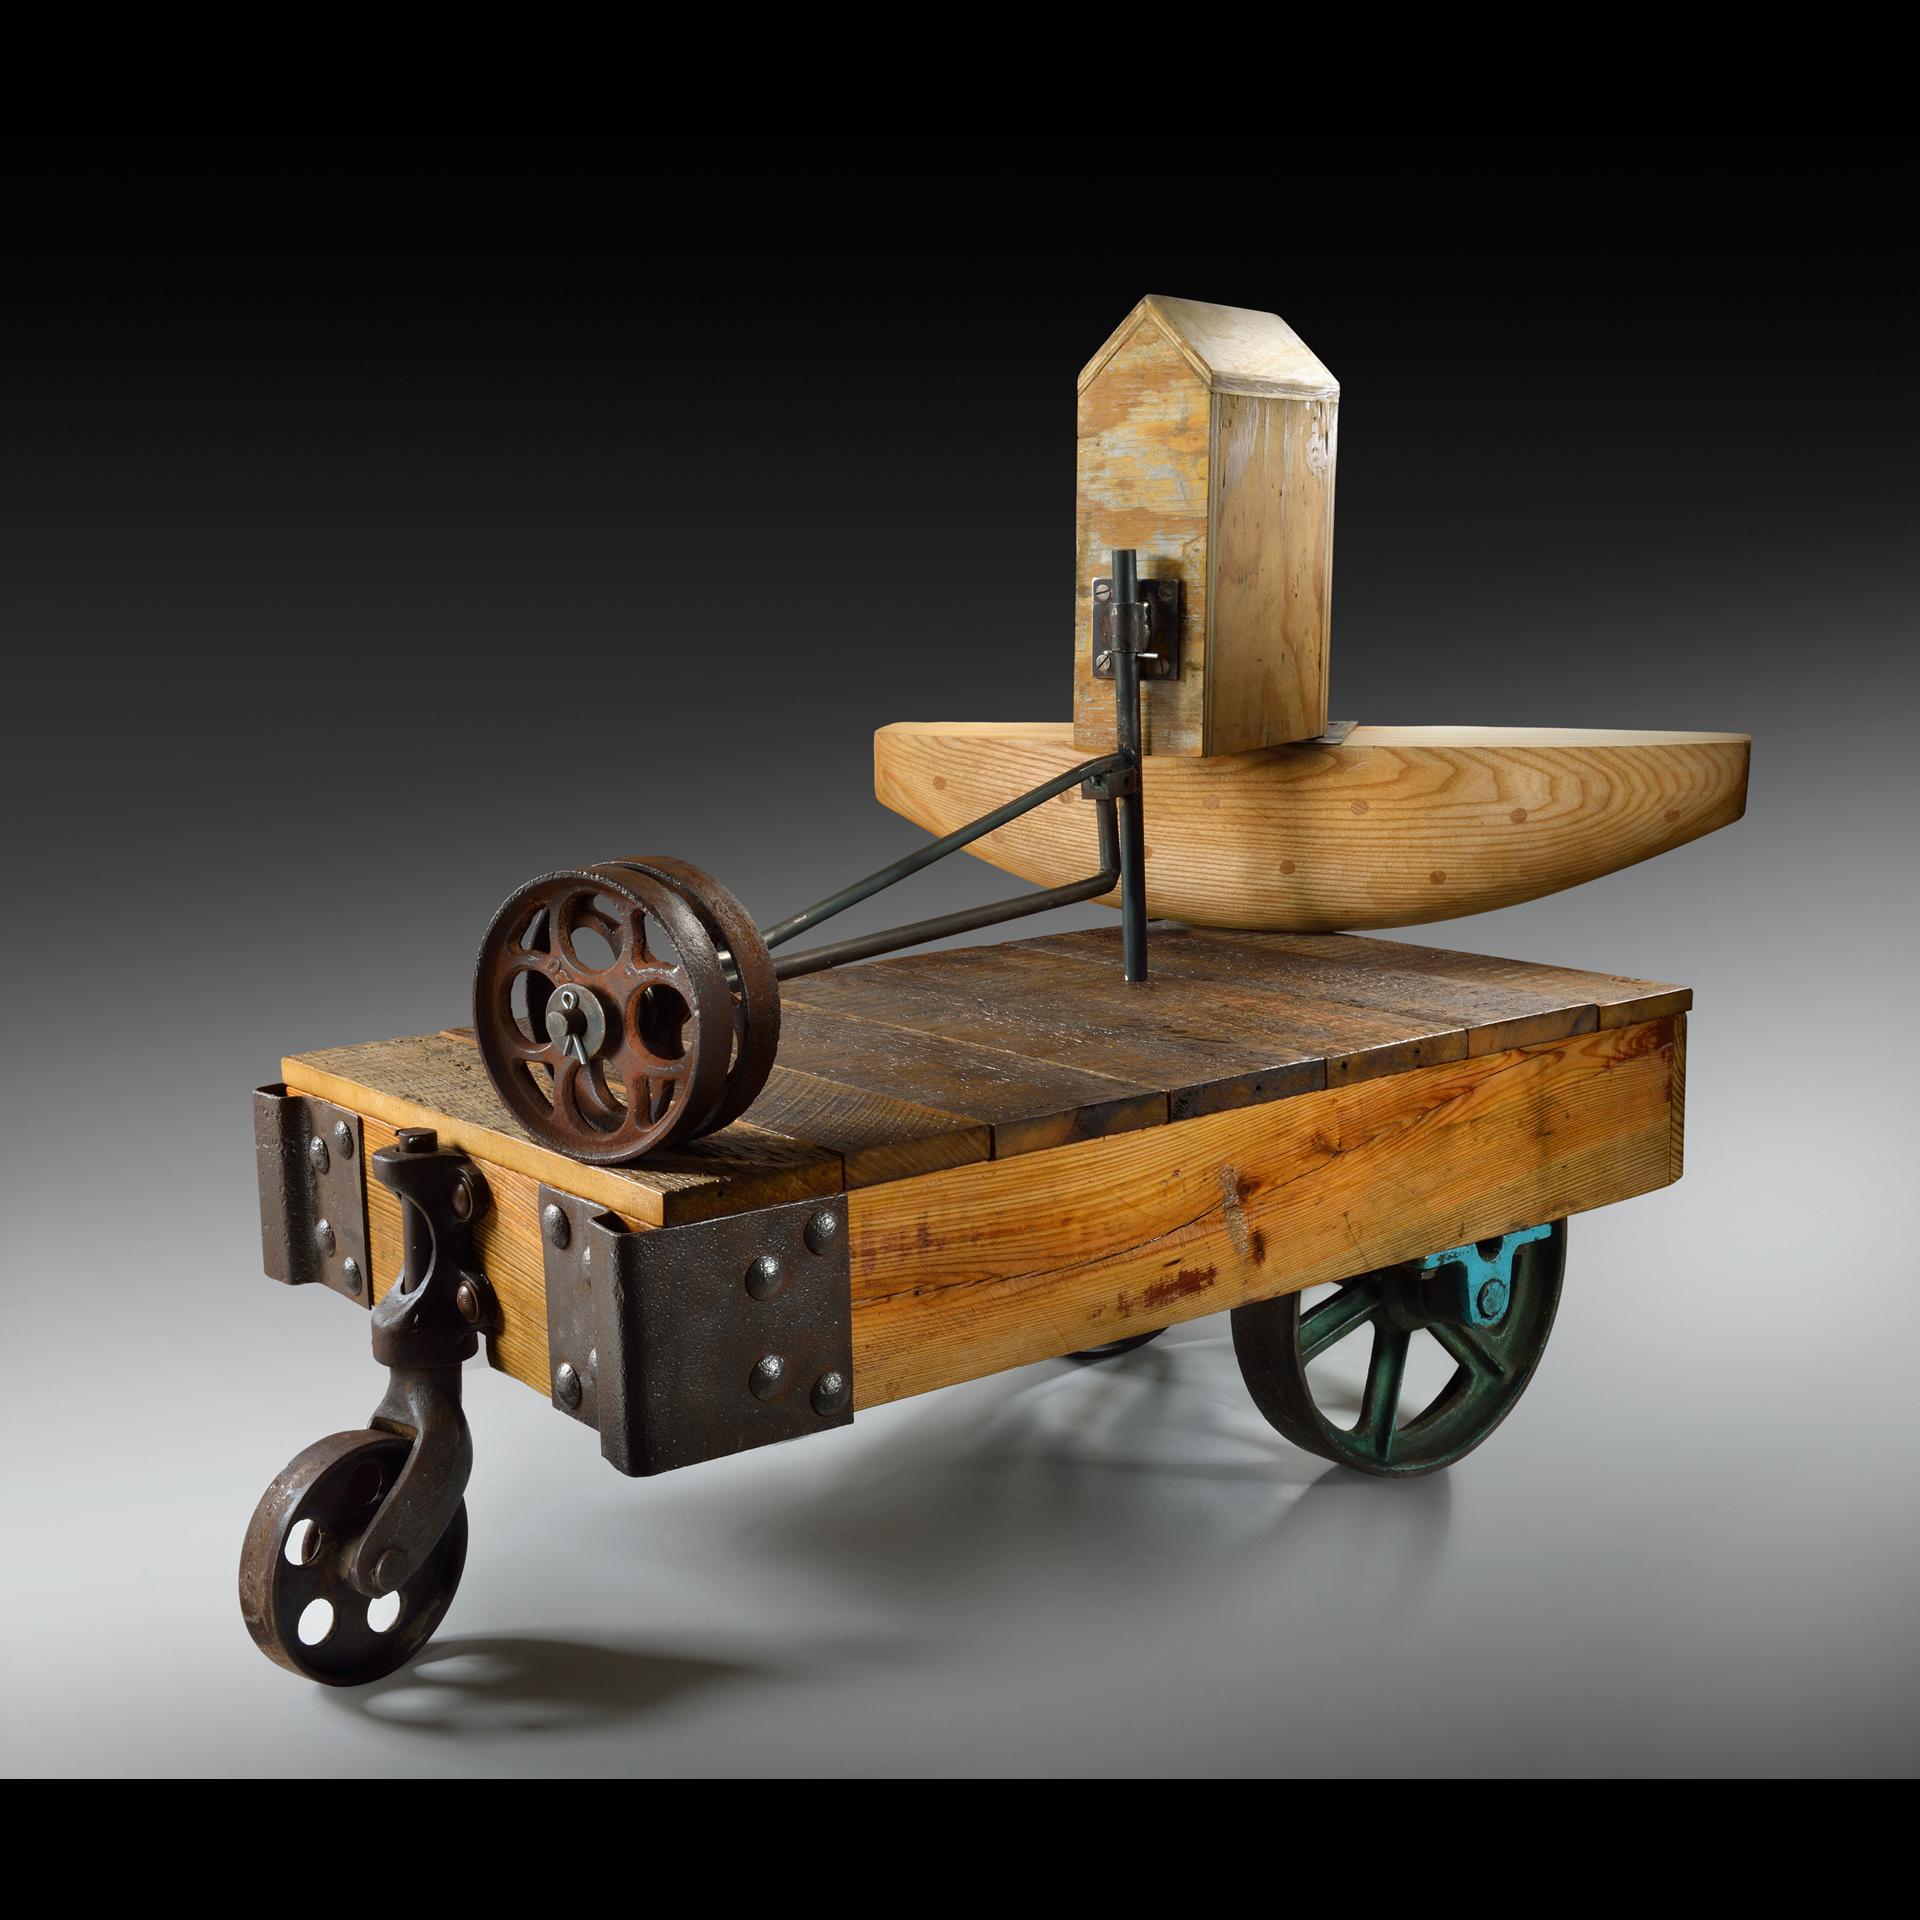 “Grist” 
2017
Fabricated wood, steel, reclaimed wheels, paint 
47 h X 31 w X 35 d (inches) 
Signed
Provenance: The collection of the artist

Born in Jamaica, West Indies, and raised in Rochester, New York, Earl James earned a Bachelor of Fine Arts